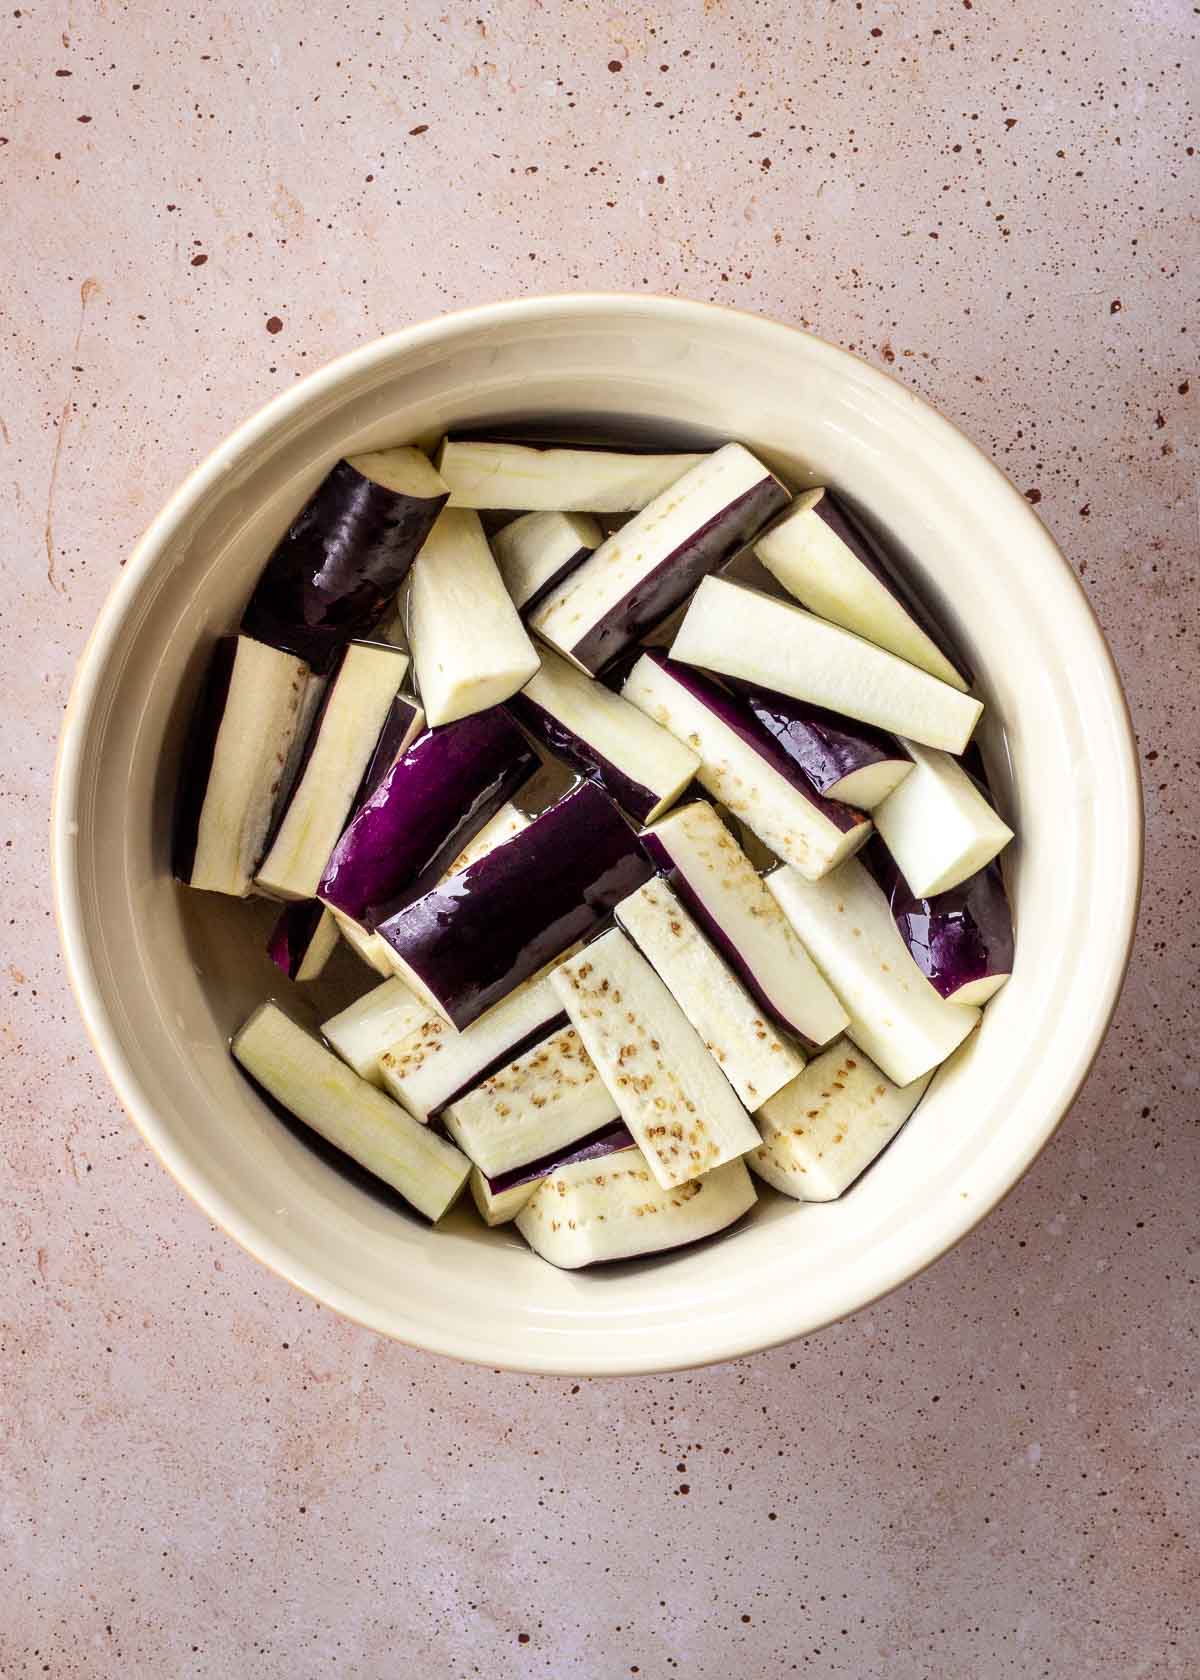 Large white bowl of eggplant slices in salt water.